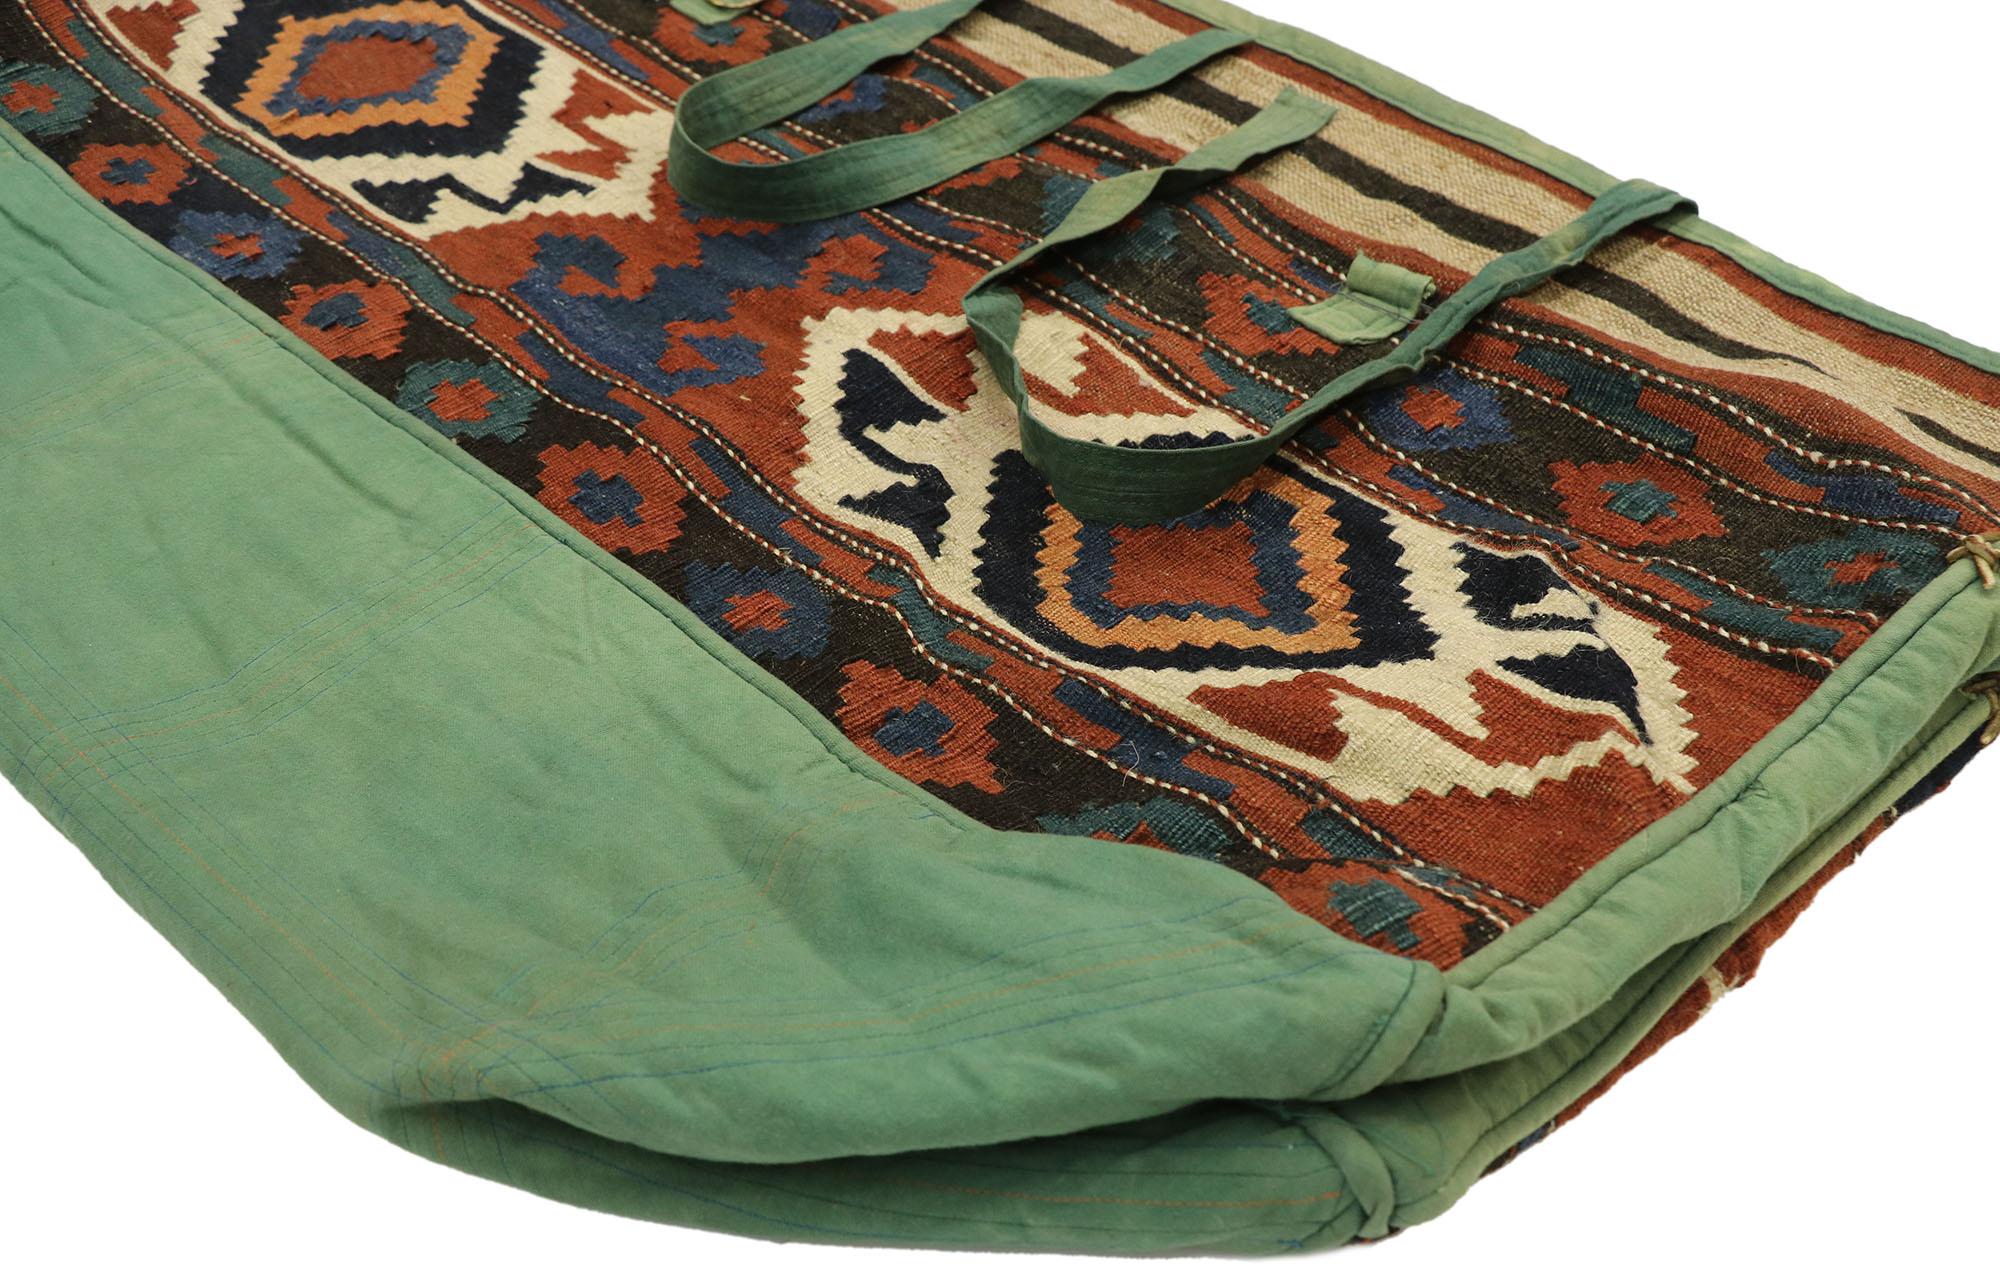 70472, antique Caucasian Kilim bag. Rich with tribal symbolism, this functional antique Caucasian knapsack features a handwoven Kilim bag face on a well worn and sun faded fabric pouch. The bag face features numerous symbols offering protection from